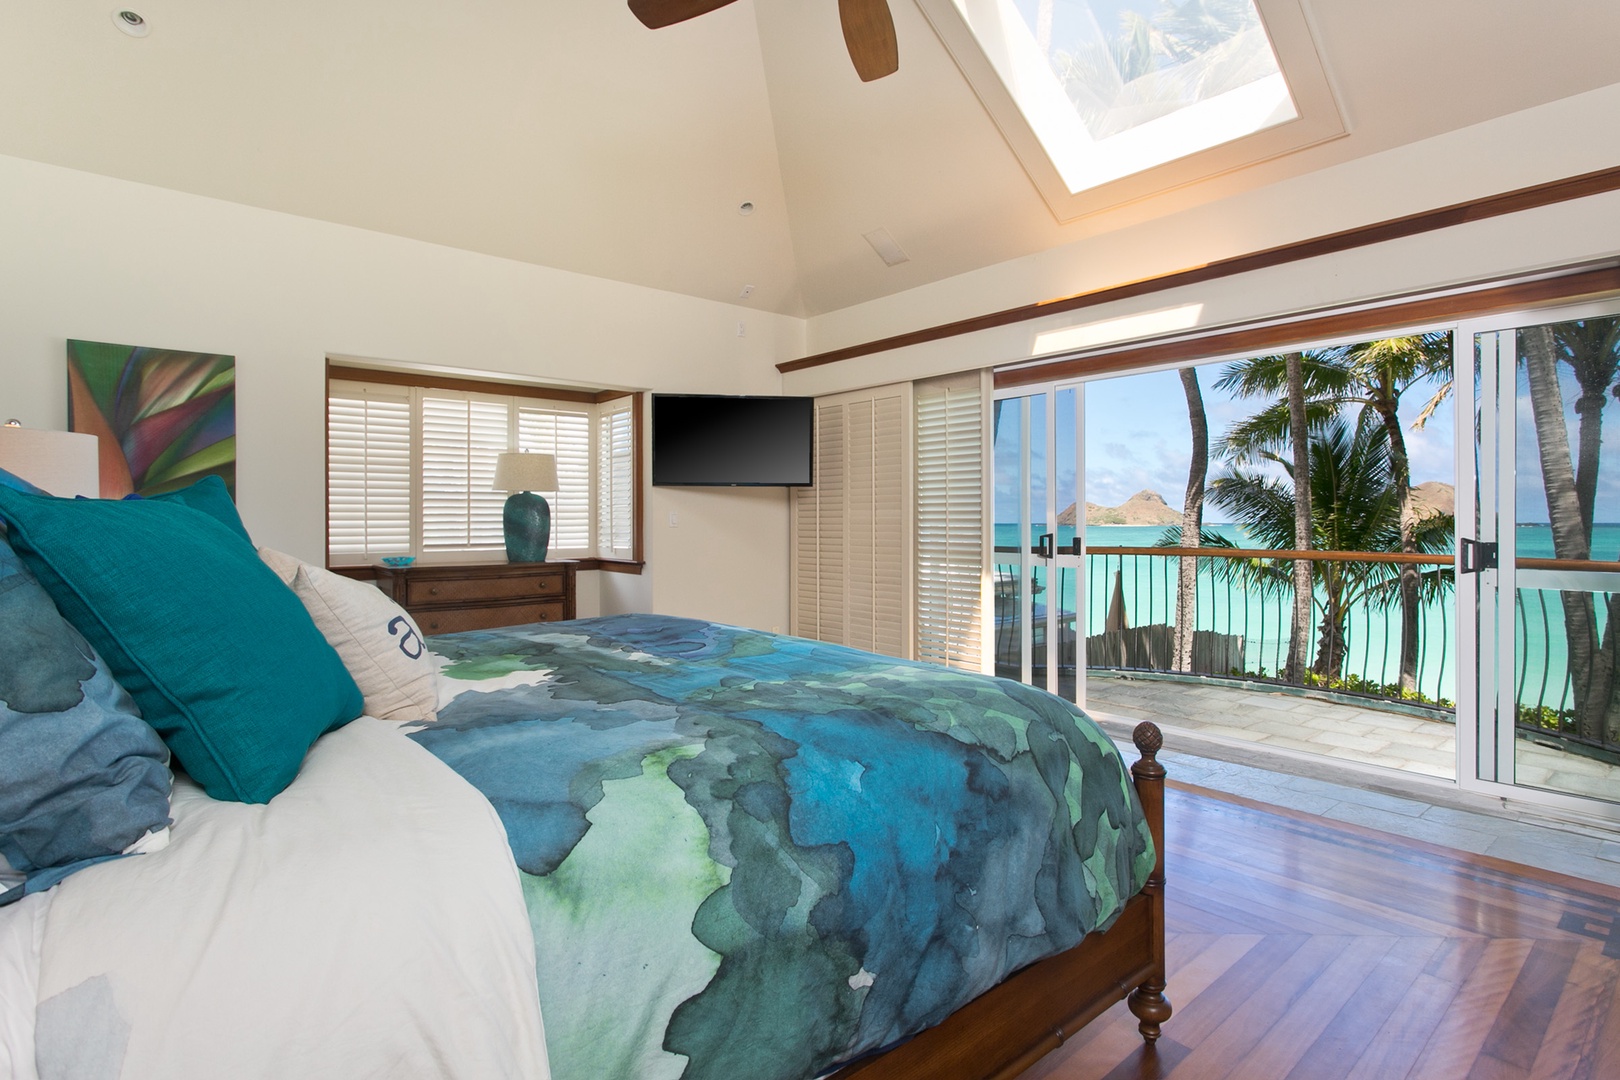 Kailua Vacation Rentals, Lanikai Village* - Hale Melia: Primary suite with a plush king bed, TV, ensuite bathroom with a large tub and a private lanai.